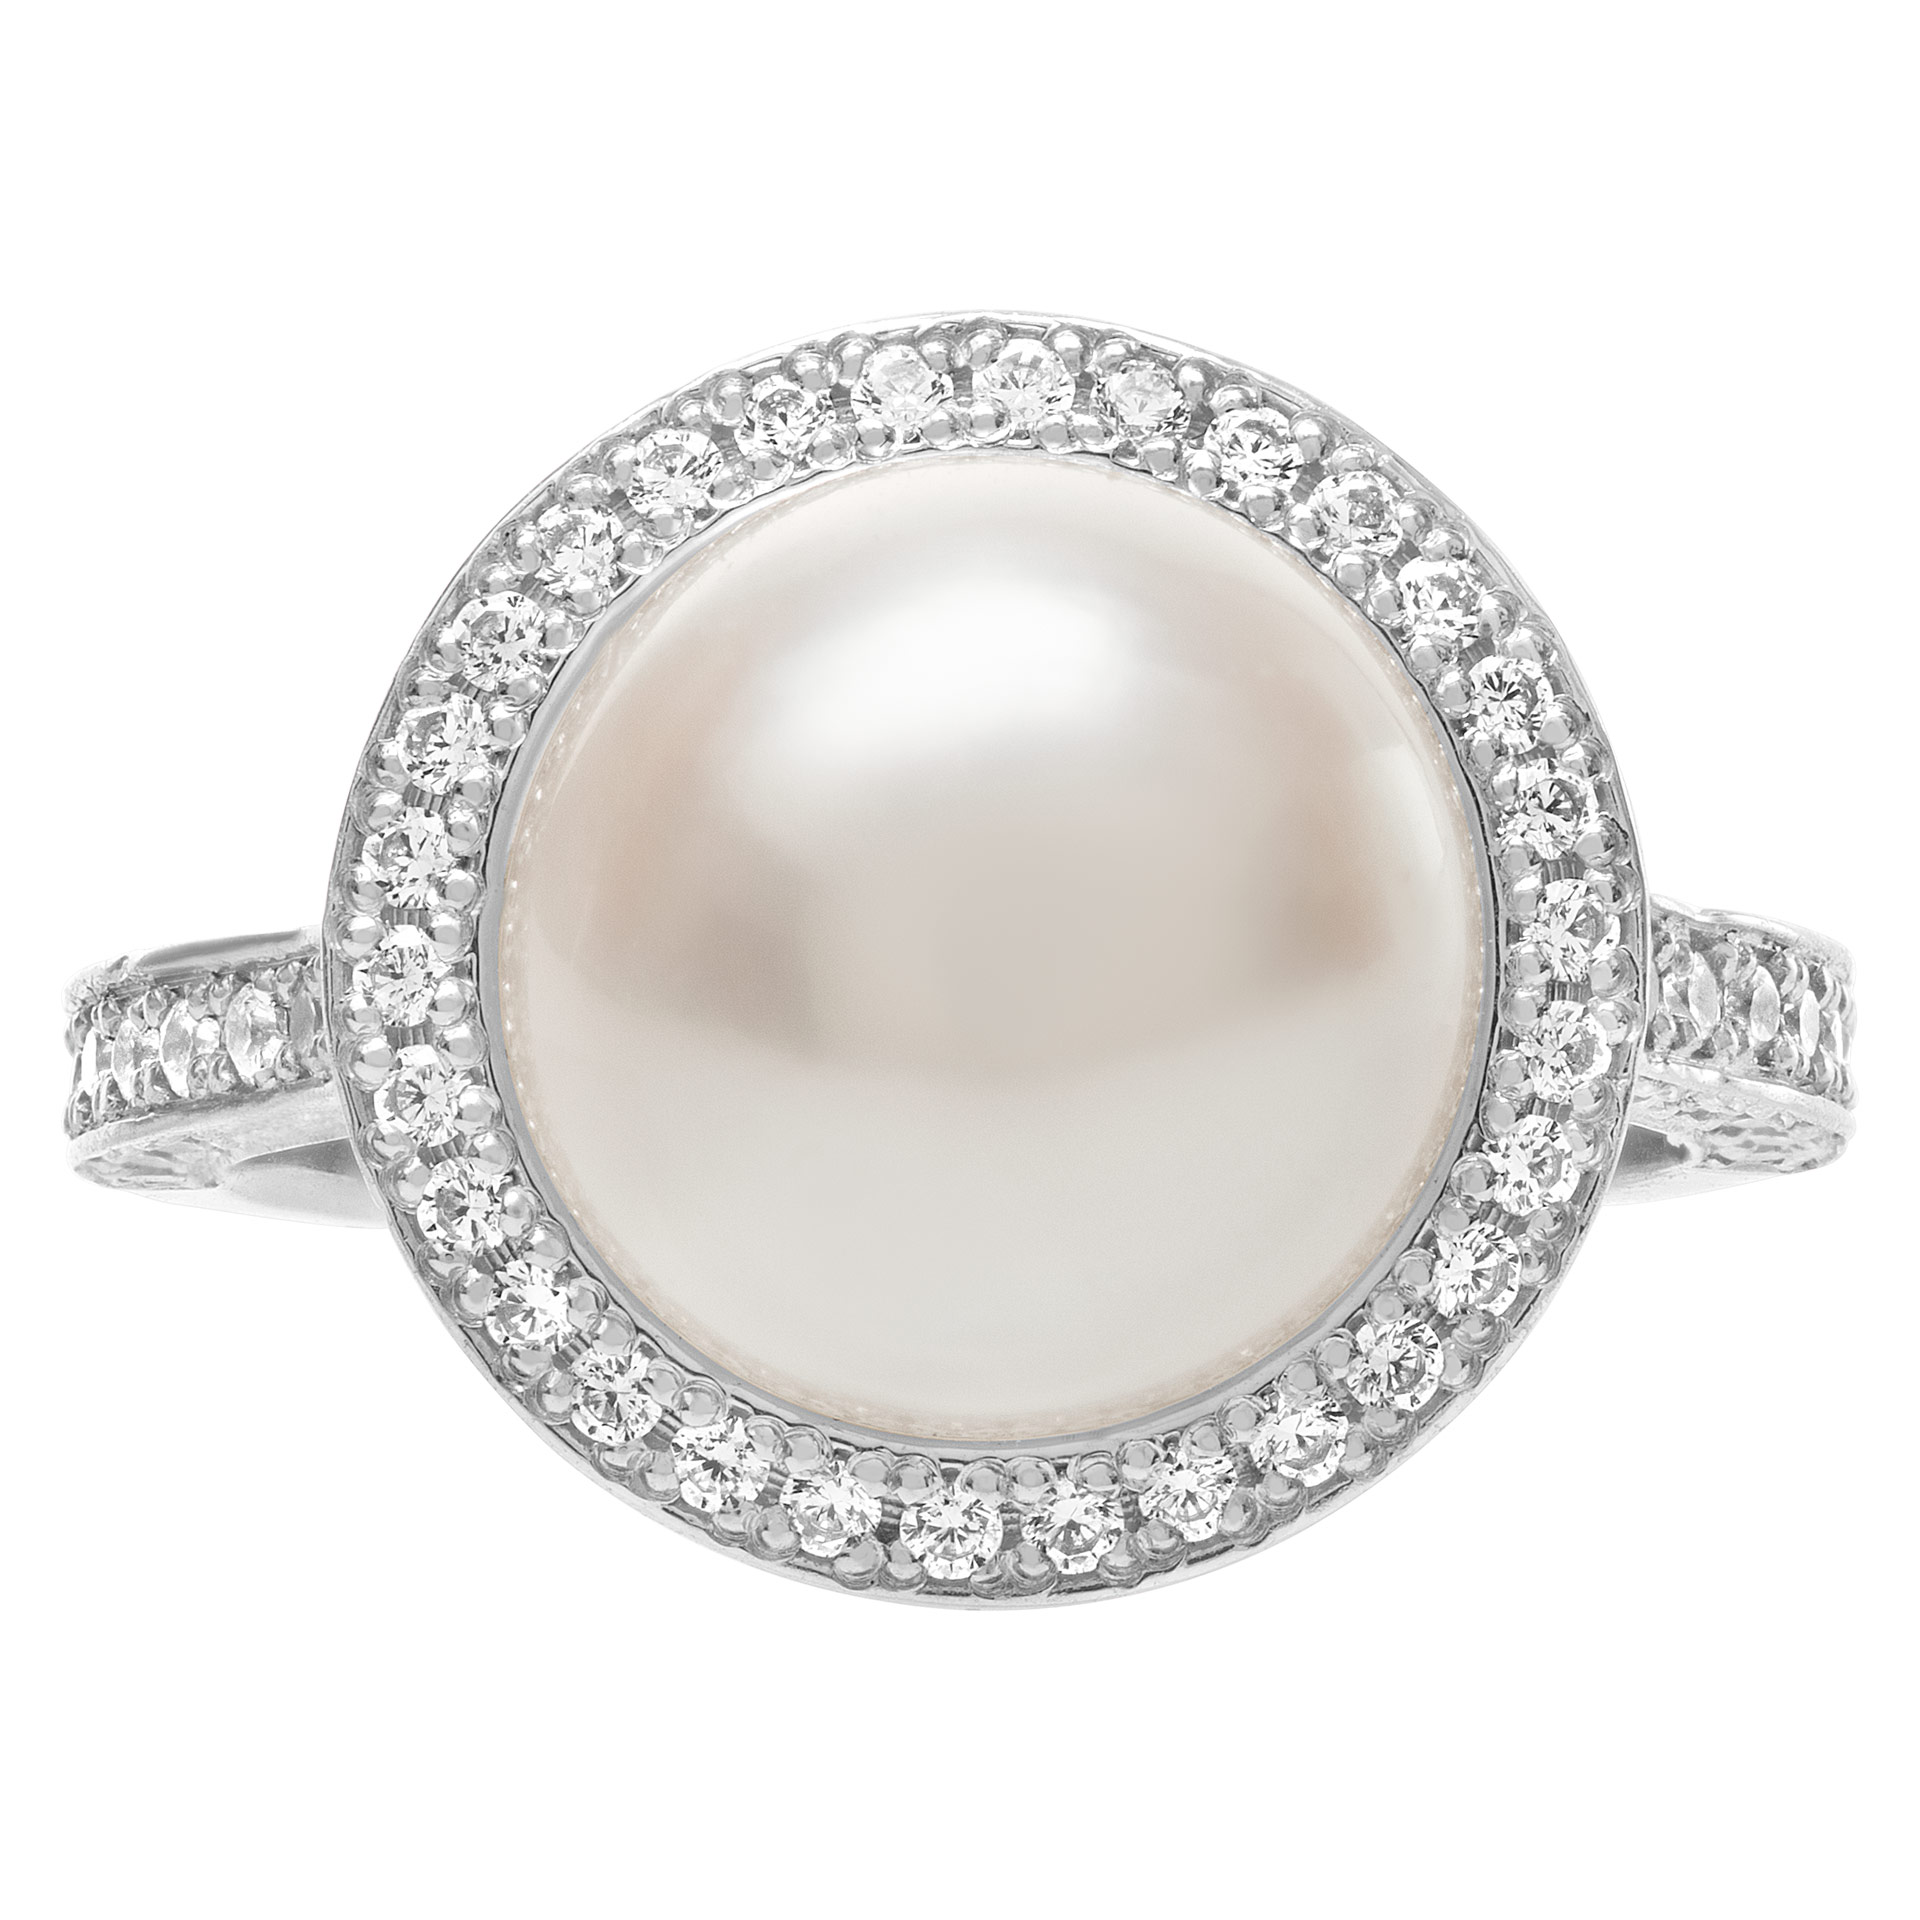 South Sea 11.7mm pearl ring with 0.64 cts in diamonds. Size 7.5